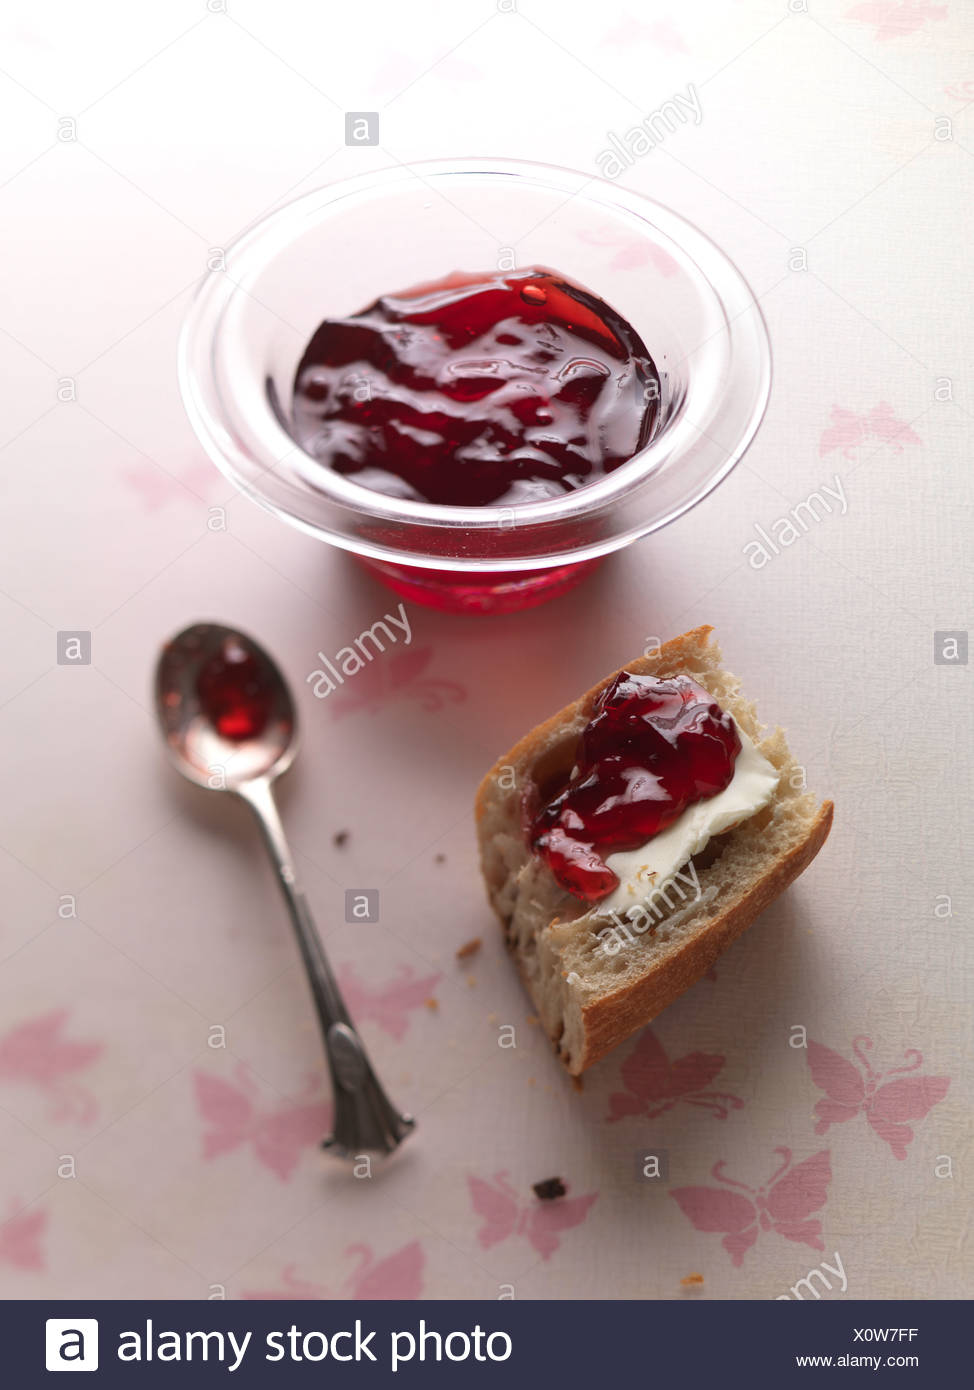 Bread Butter And Redcurrant Jelly Stock Photo 275920611 Alamy